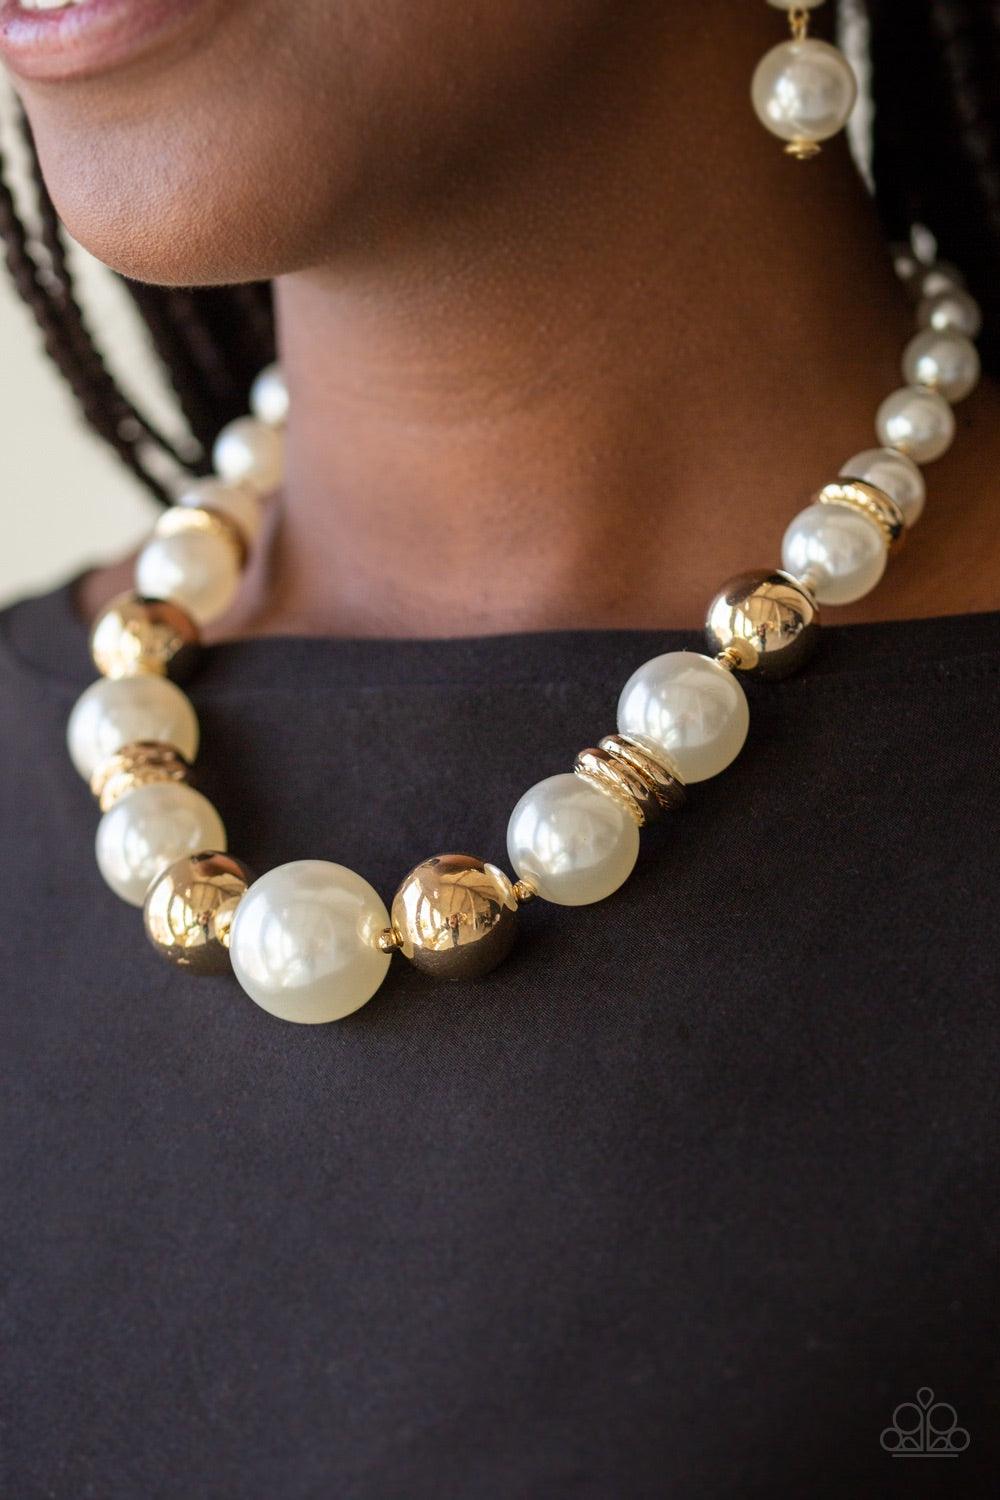 Paparazzi Accessories New York Nightlife - Gold Gradually increasing in size toward the center, dramatic white pearls and shiny gold beads drape below the collar for a refined look. Glistening gold accents are sprinkled between the classic beads, adding d